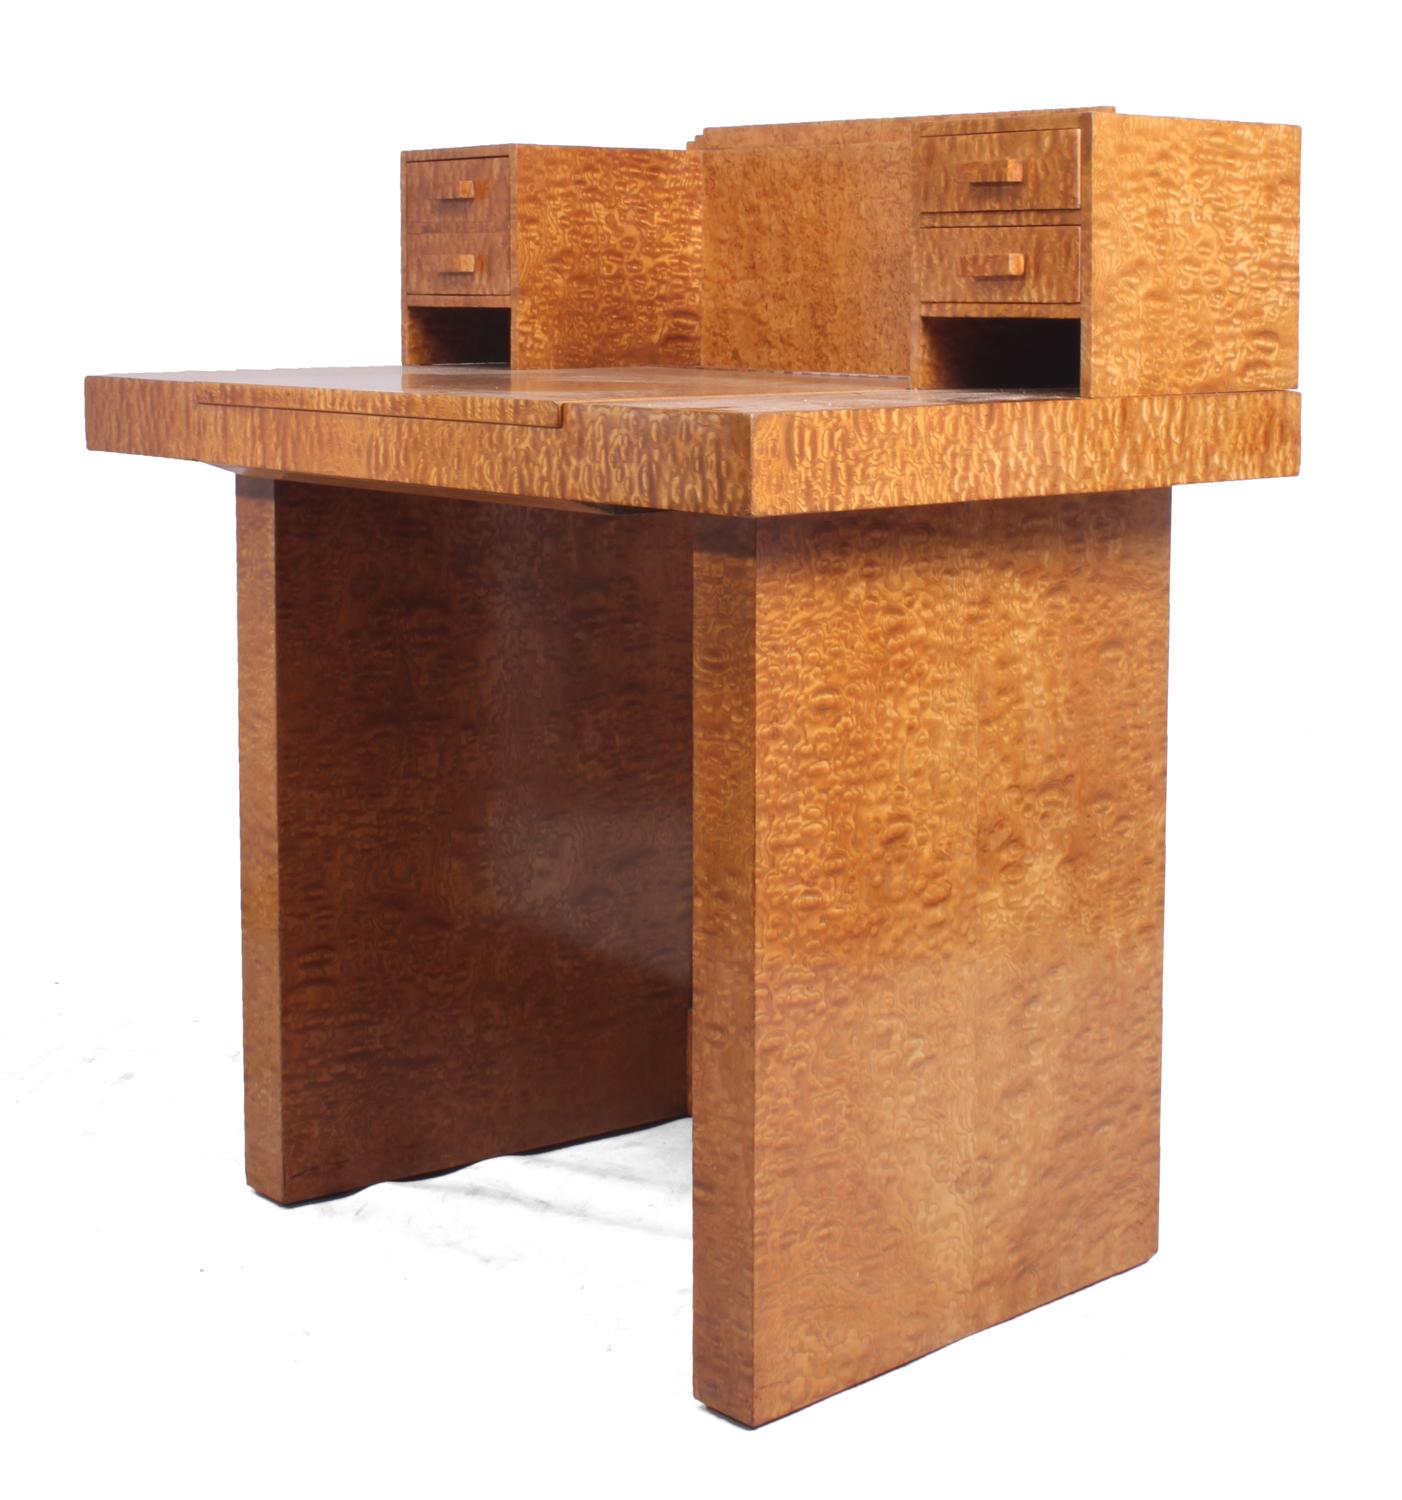 Art Deco ladies writing desk and chair, circa 1930
Produced in France in the 1930s using Tamo Ash, it has a lift up lid, and super structure on the back the left drawer is double depth and two drawers on the right. These have handcut dovetail